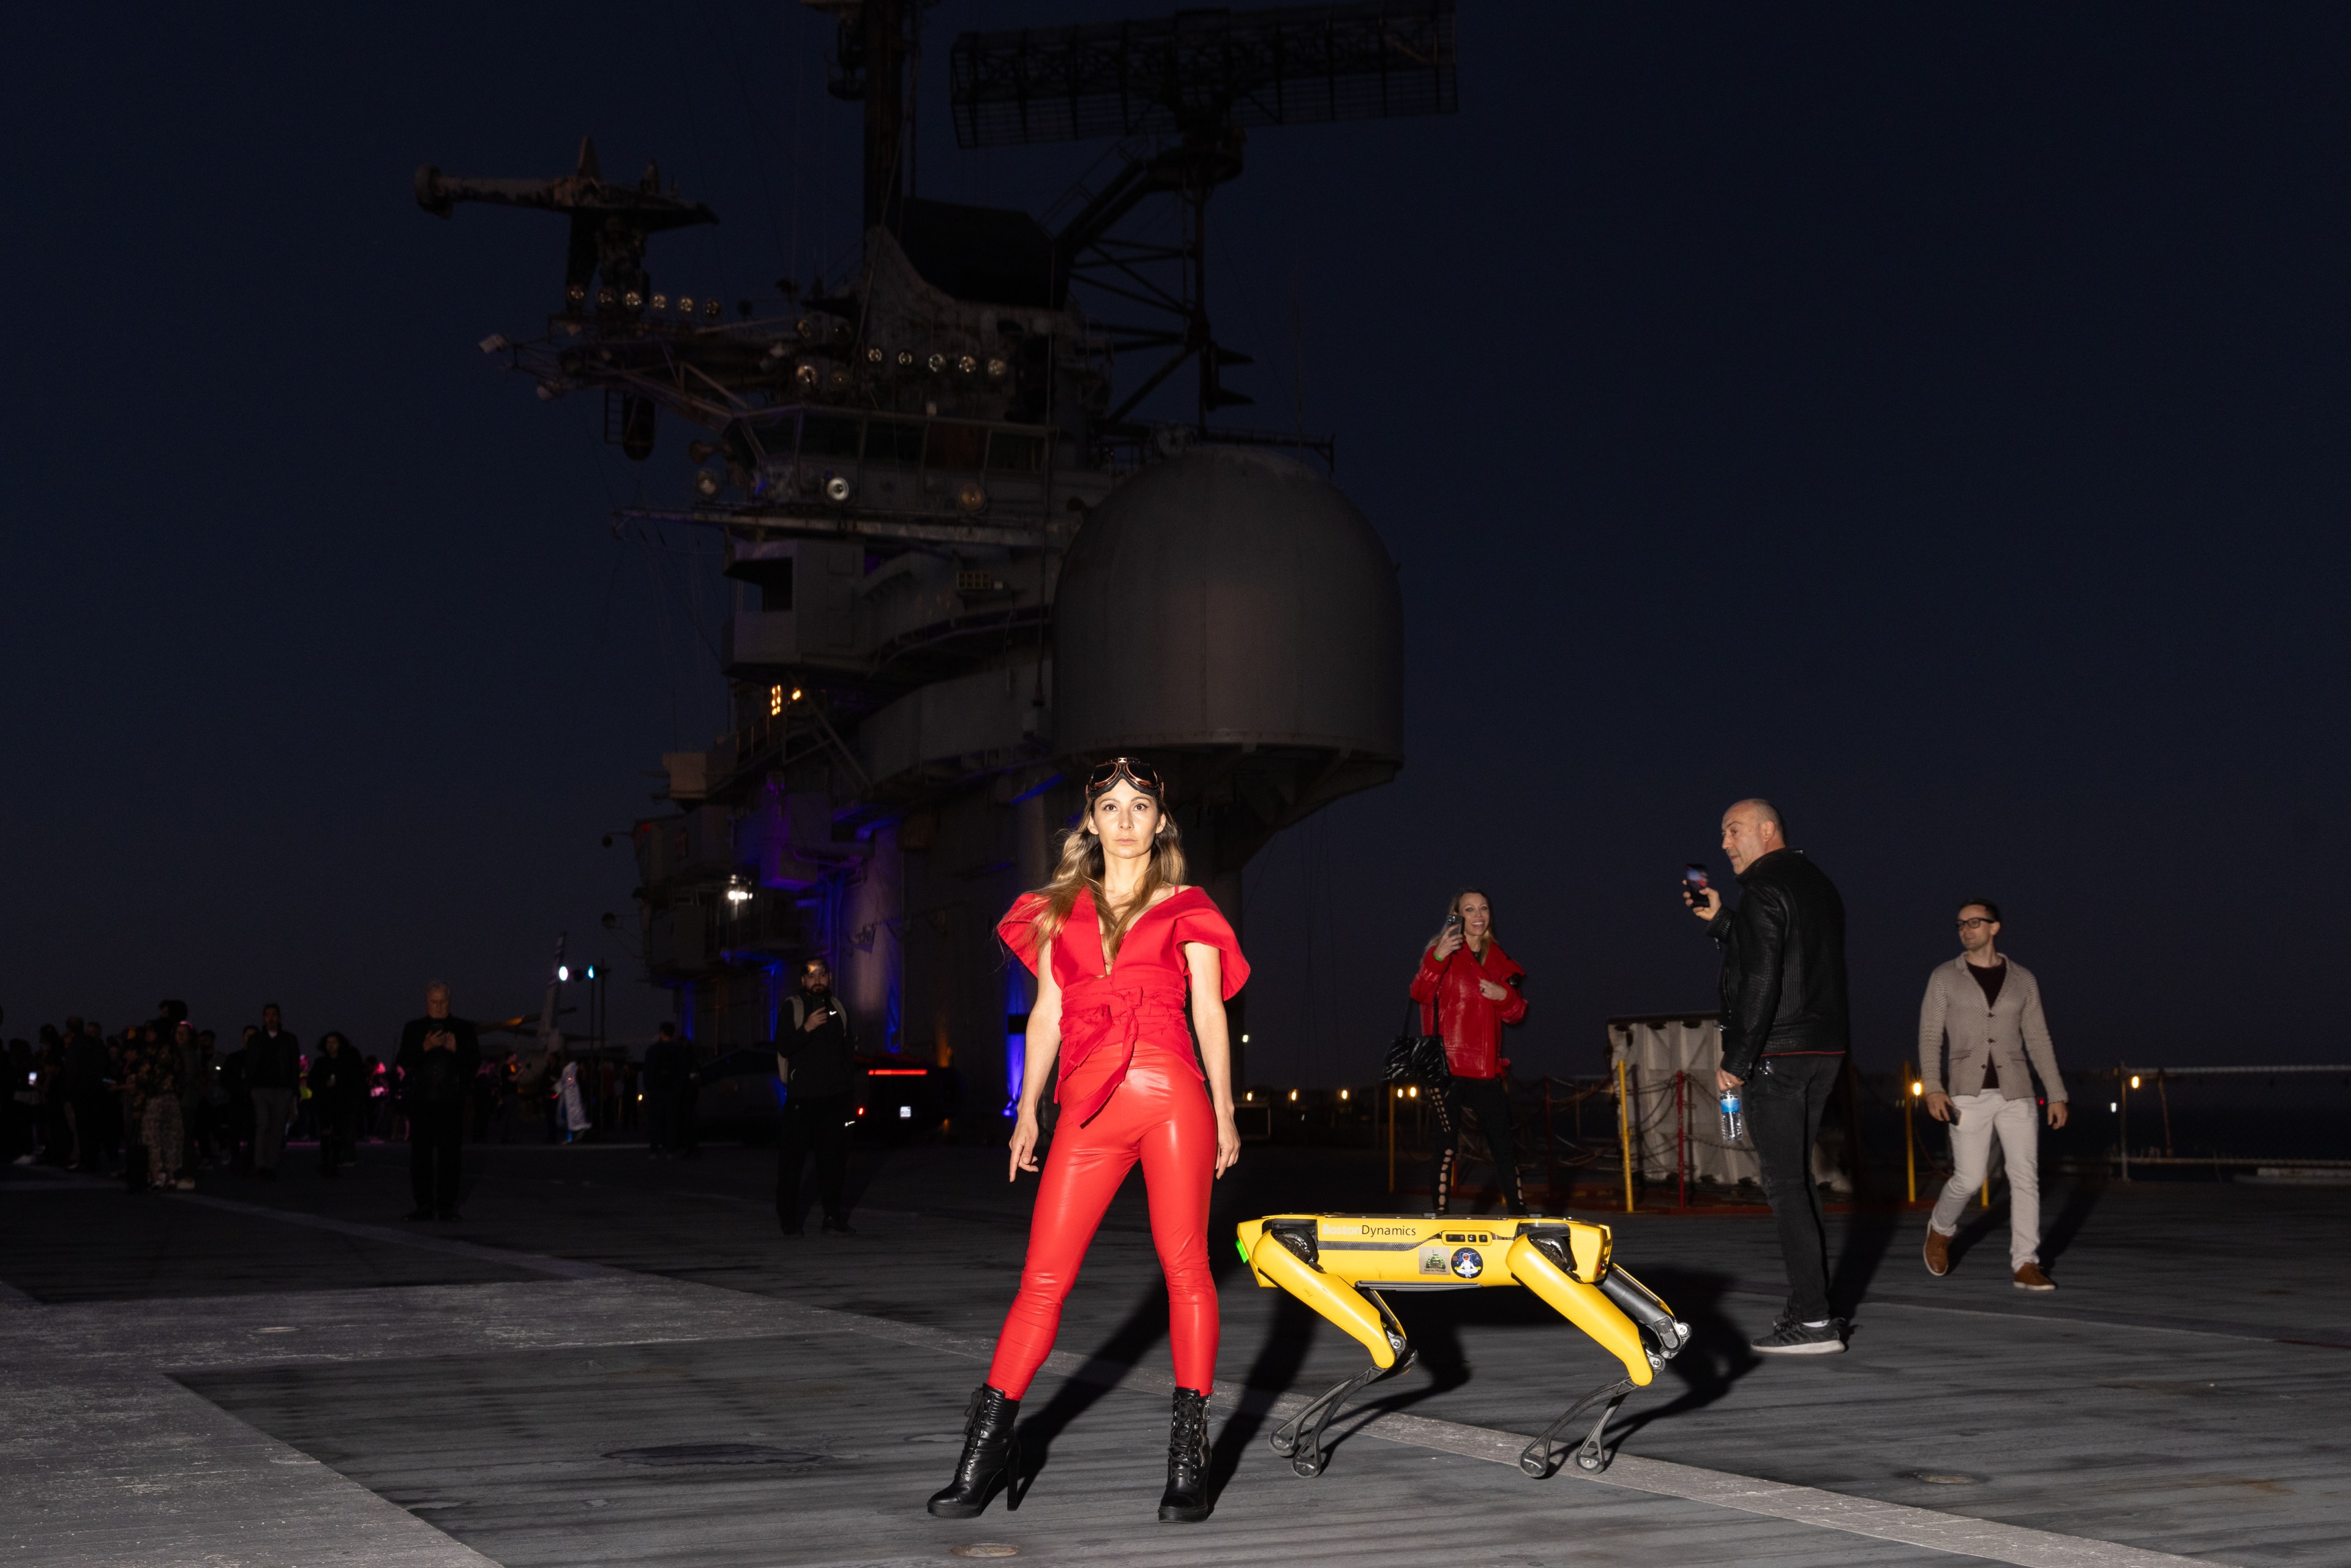 A woman in bright red attire poses confidently next to a yellow robotic dog on an outdoor platform at night; bystanders observe and photograph the scene.